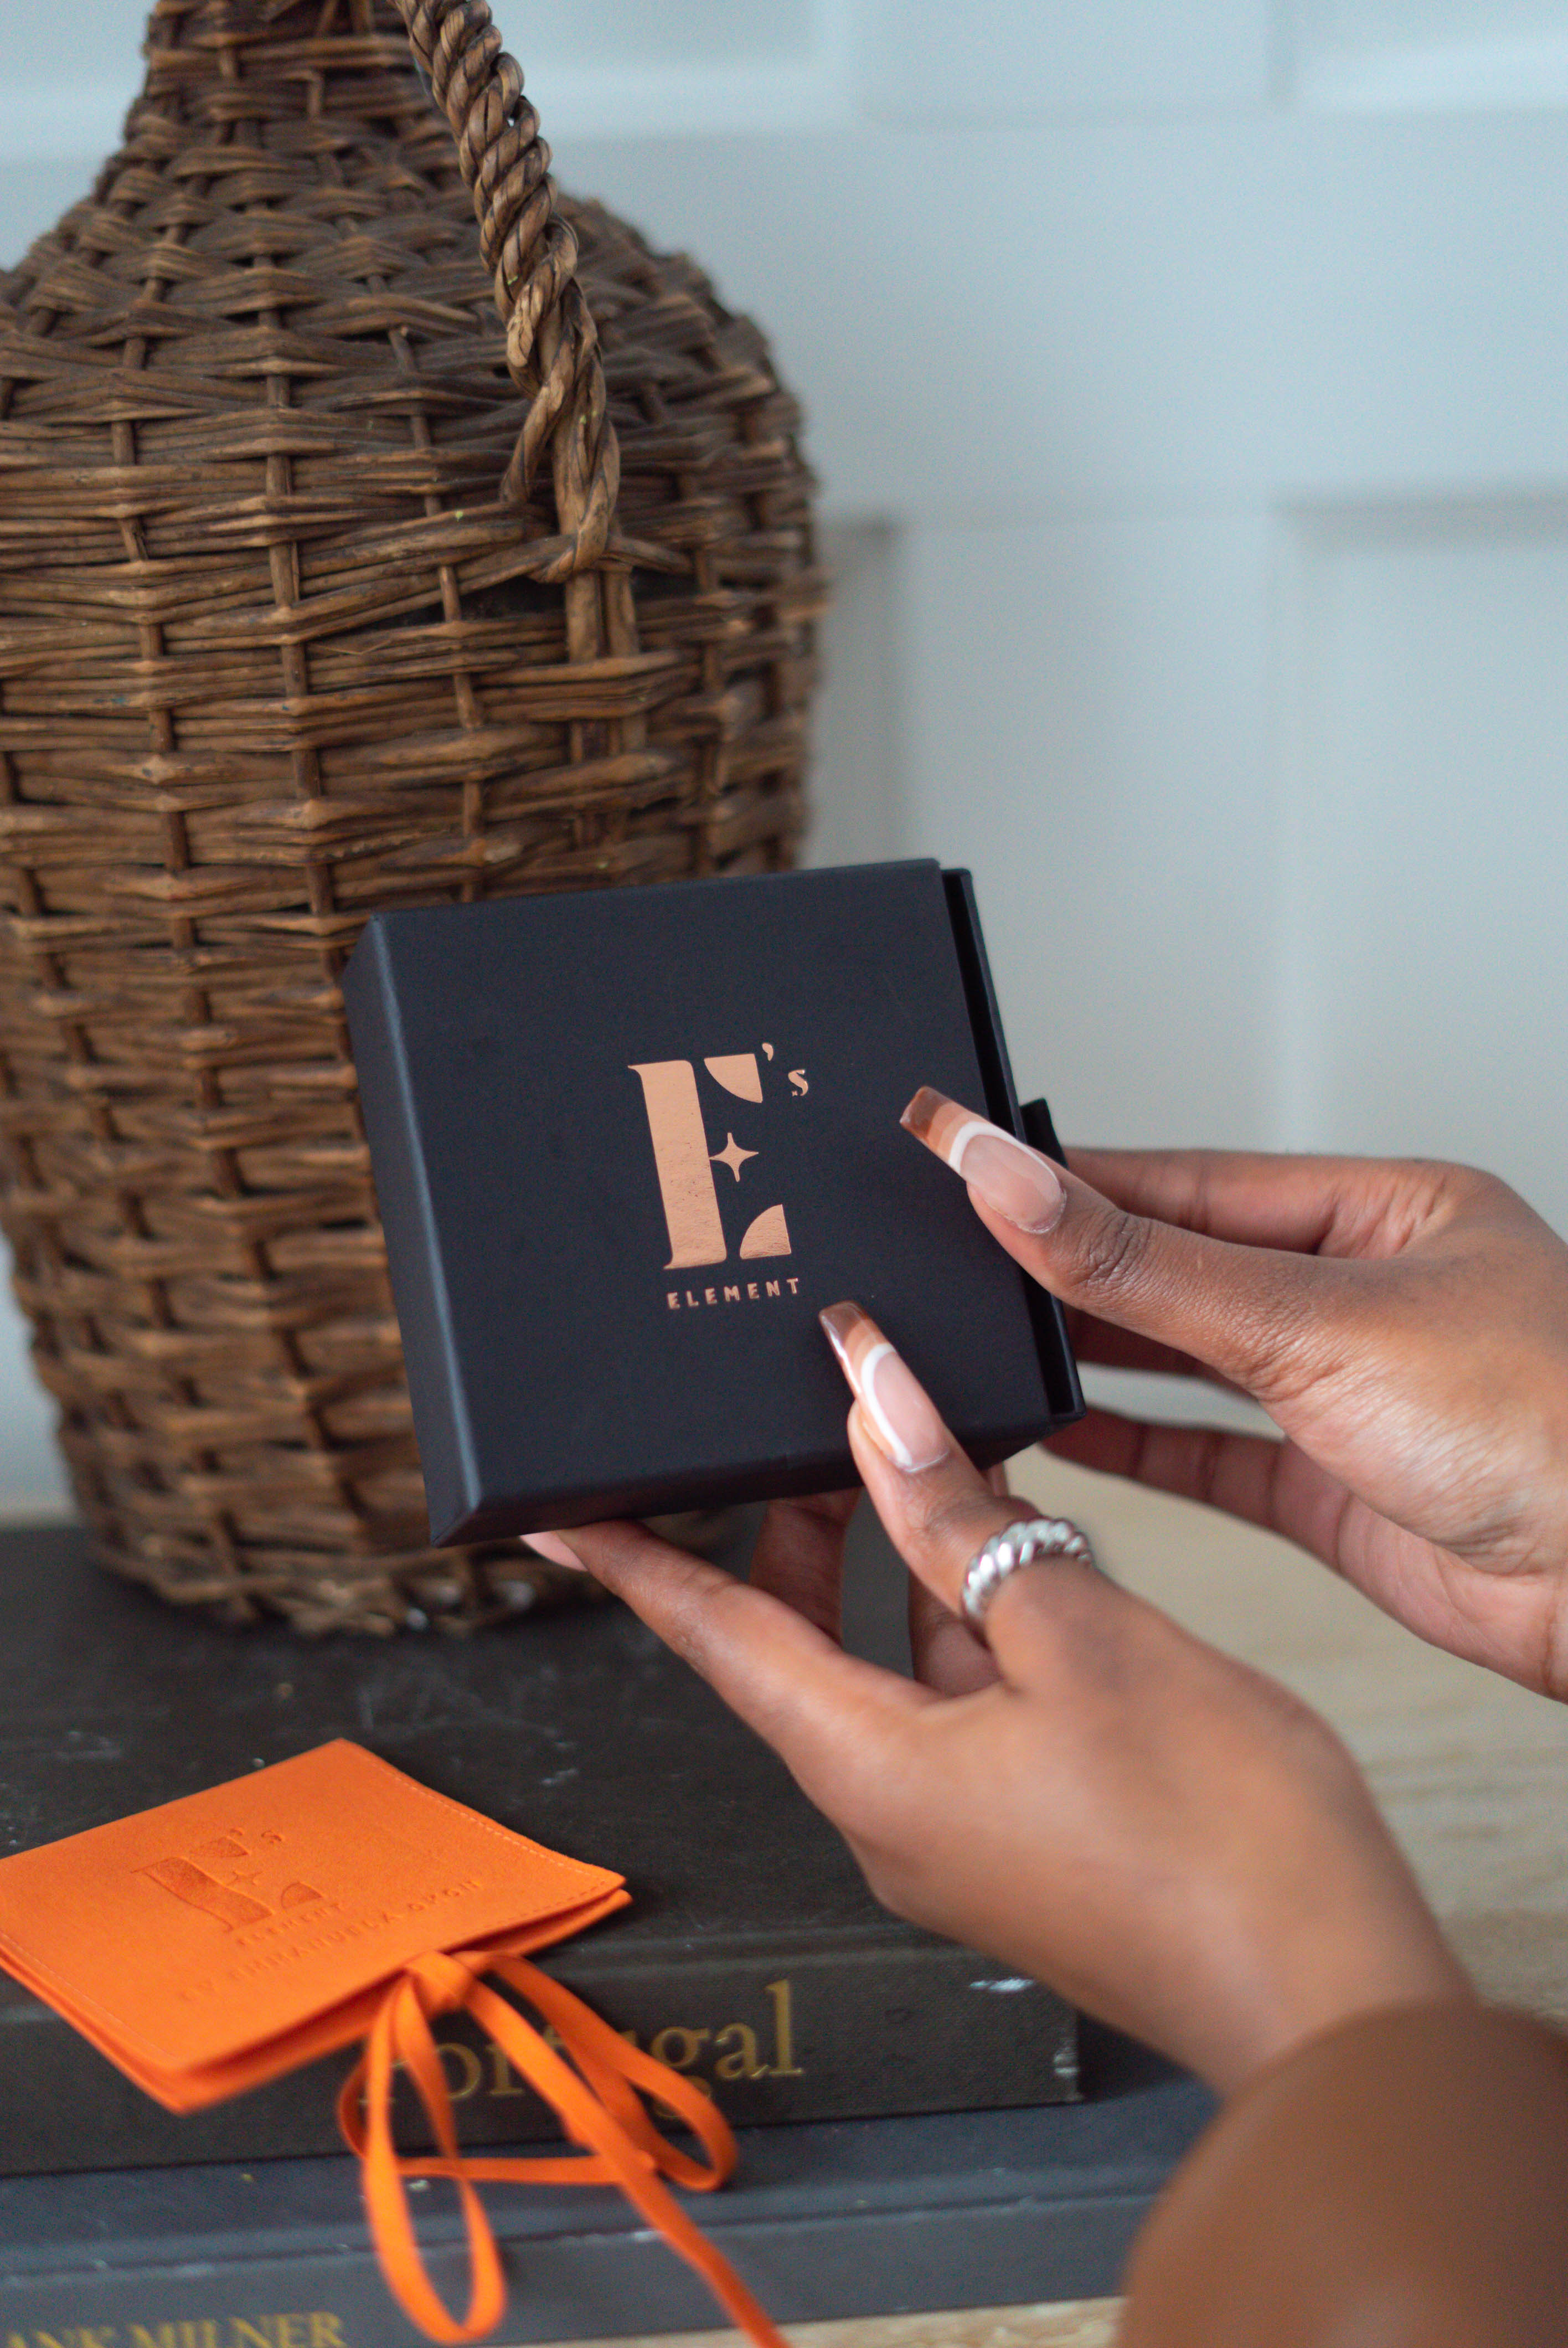 Hands holding an E's Element branded jewlery box